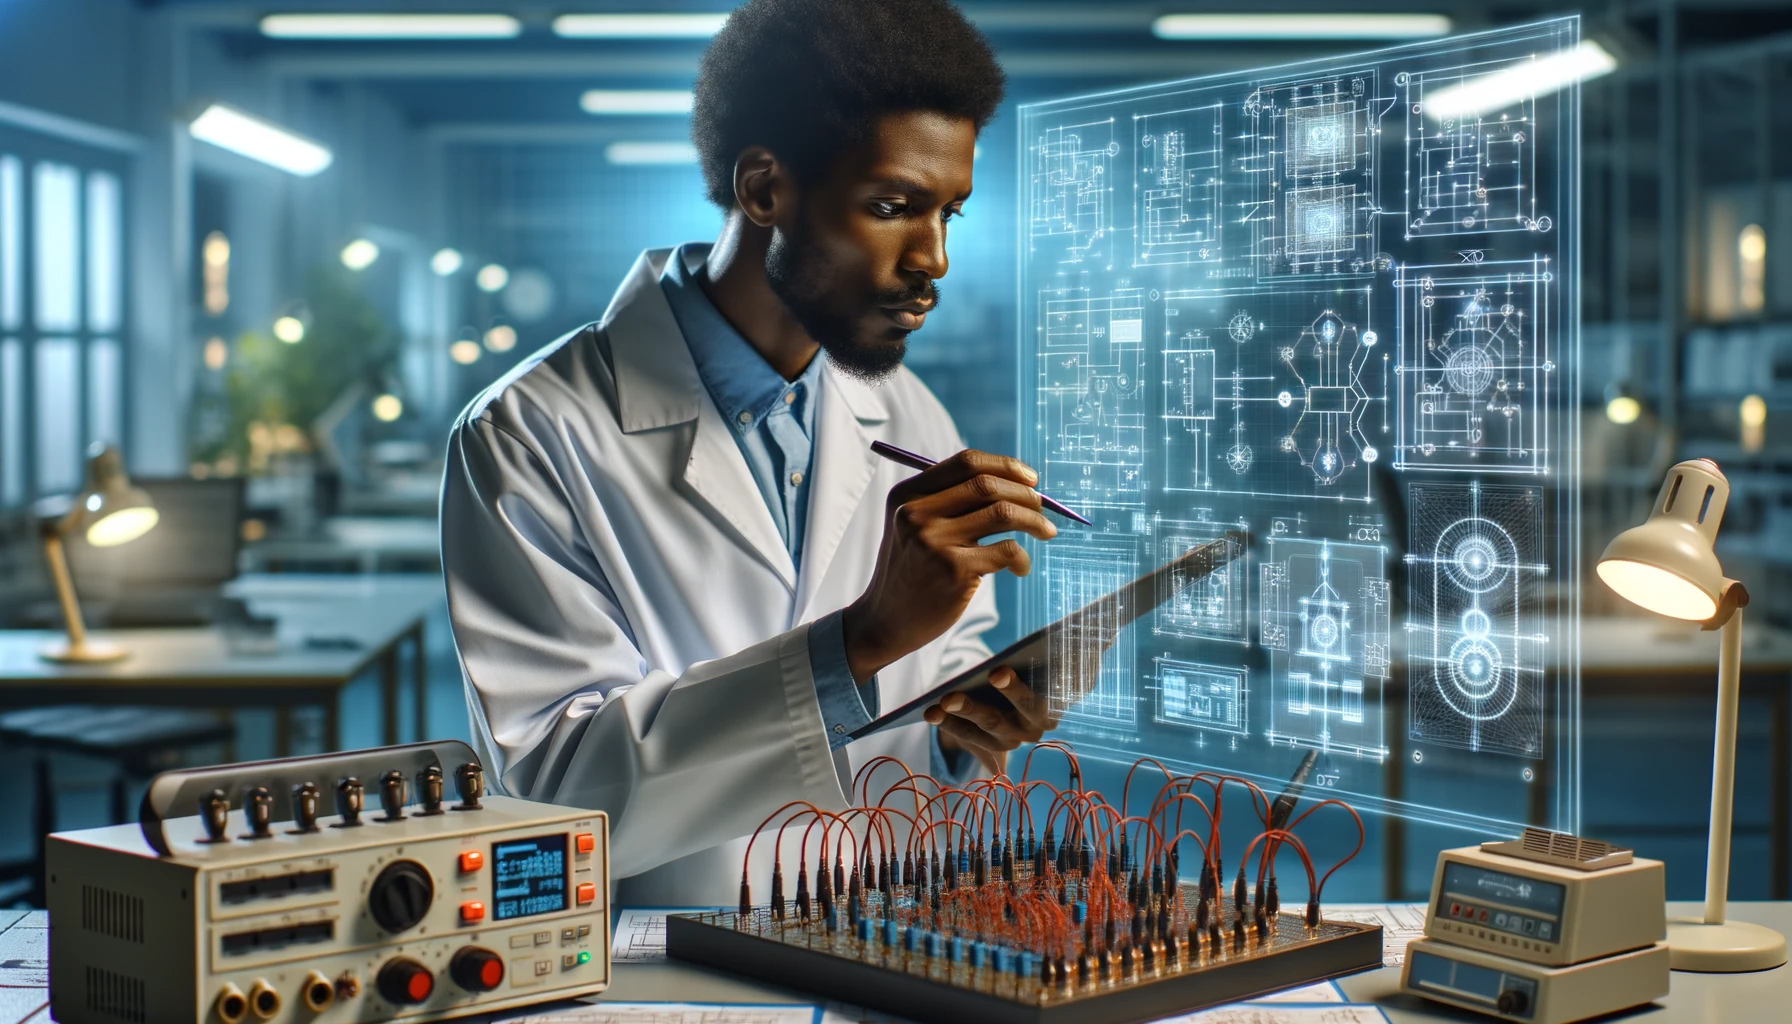 DALL·E 2023-11-02 16.44.51 – Illustration of an electrical engineer with African descent in a lab coat designing an electrical system on a transparent digital screen, with schemat